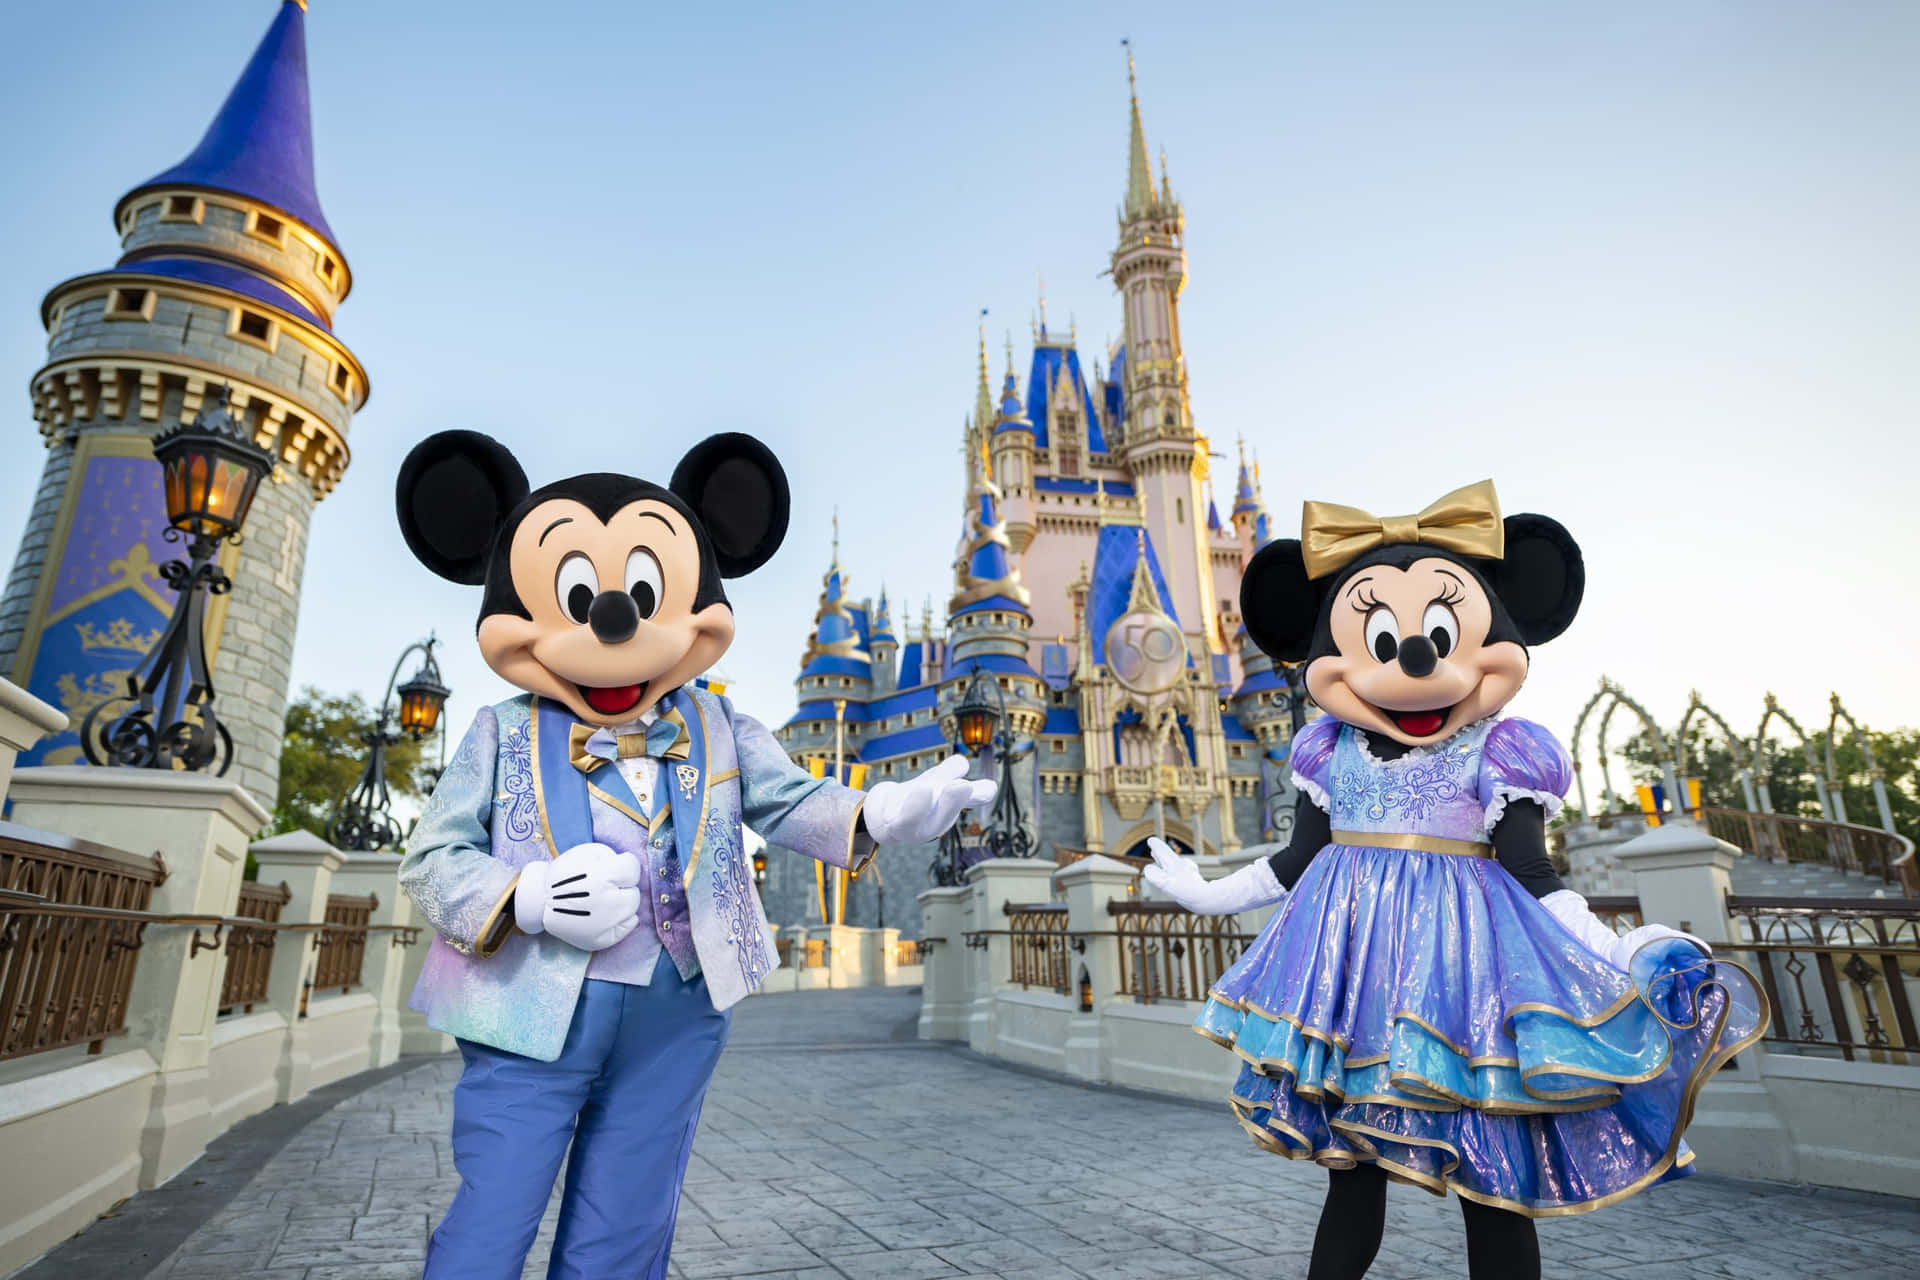 Enjoy a magical moment with Mickey and Friends at Disney!